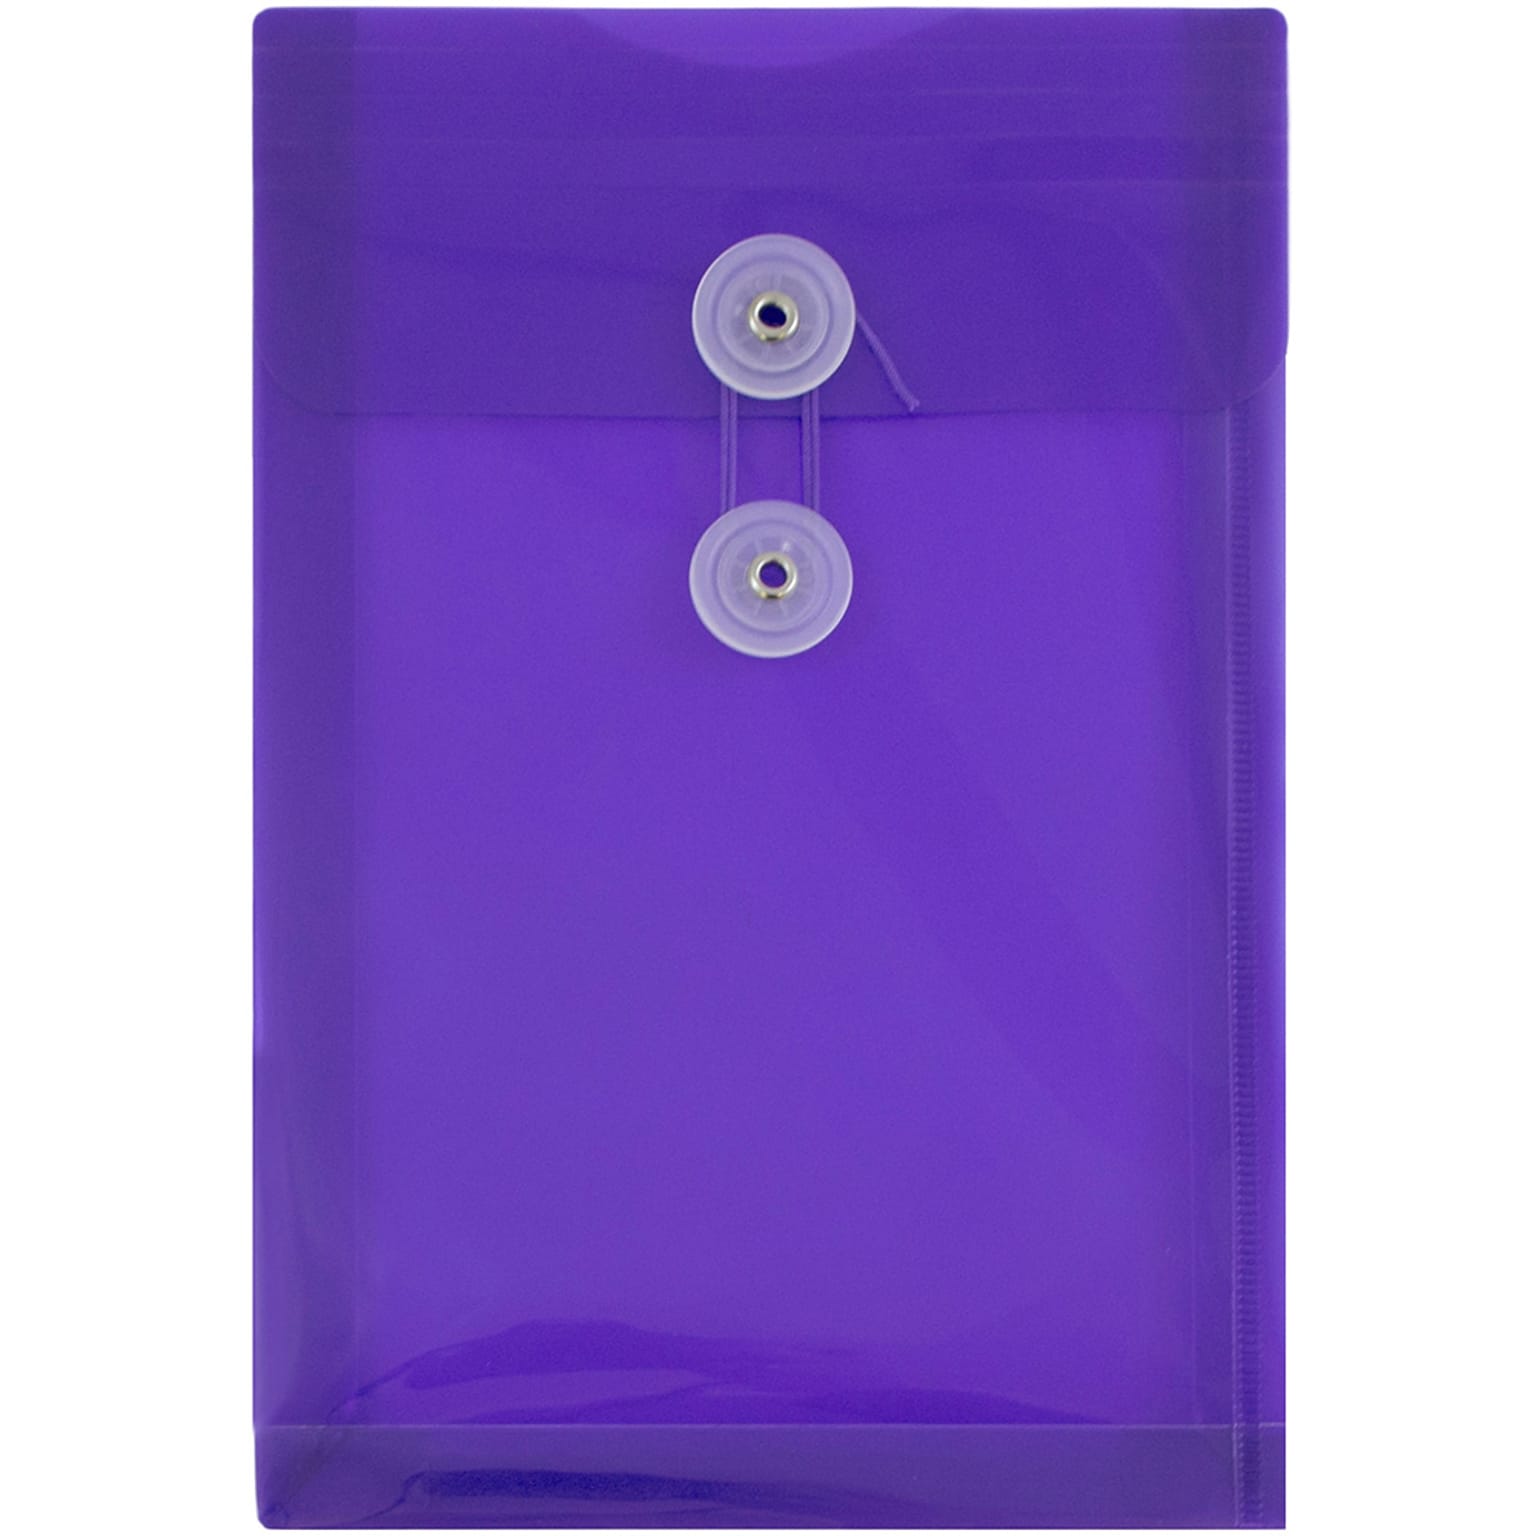 JAM Paper® Plastic Envelopes with Button and String Tie Closure, Open End, 6.25 x 9.25, Purple Poly, 12/pack (472B1PU)